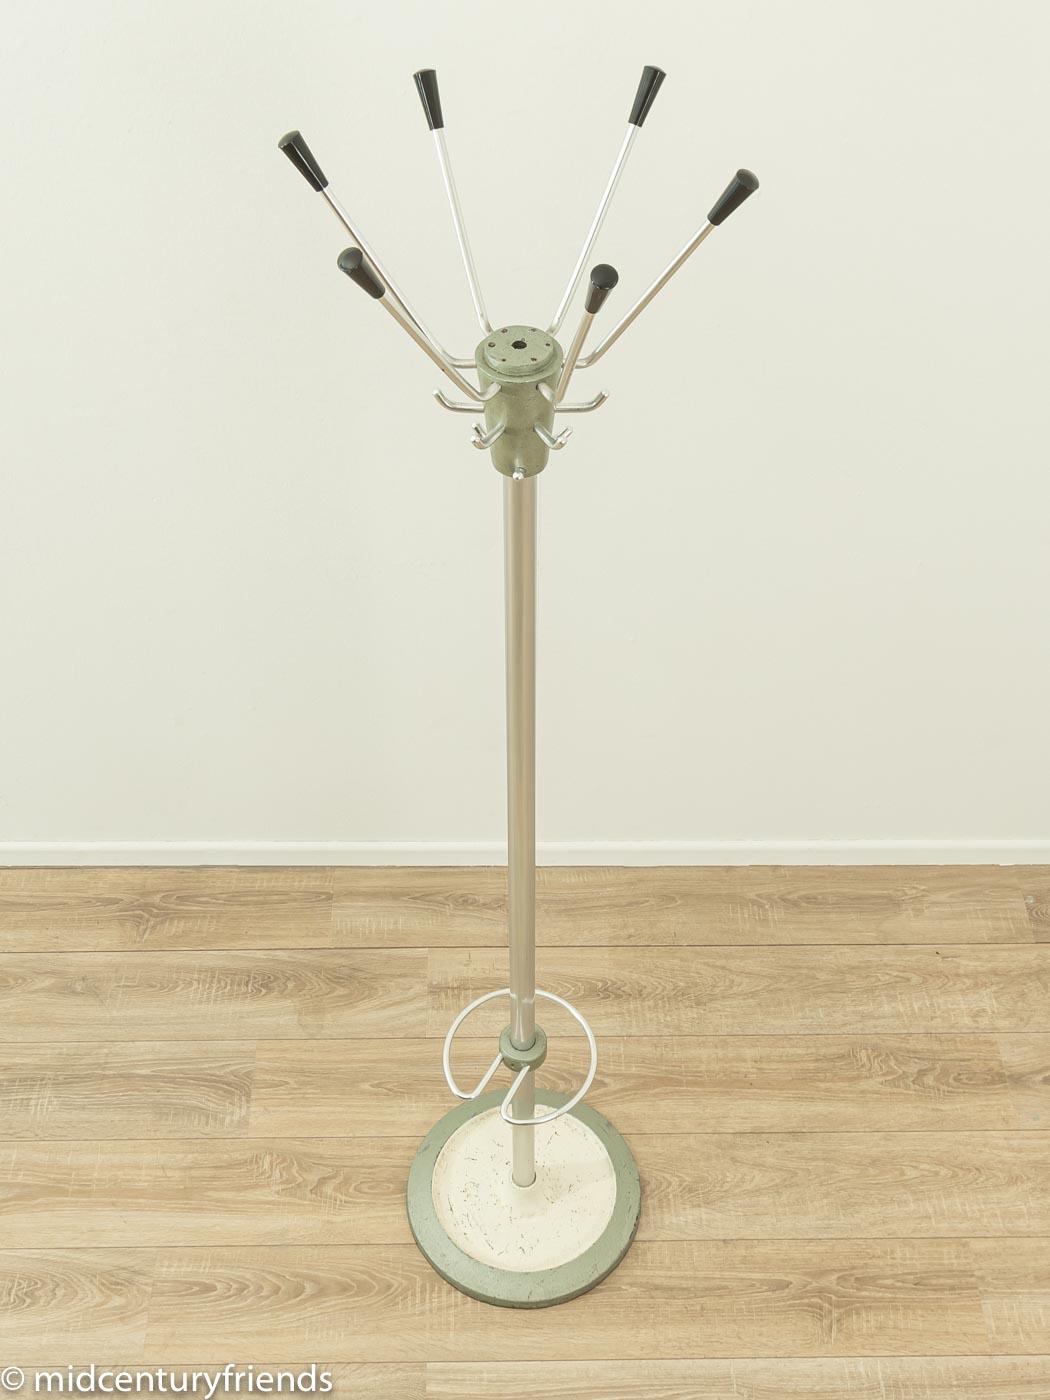 Wonderful coat stand from the 1960s. High-quality frame made of stainless steel with six hooks, an umbrella holder and a metal base. Made in Germany.